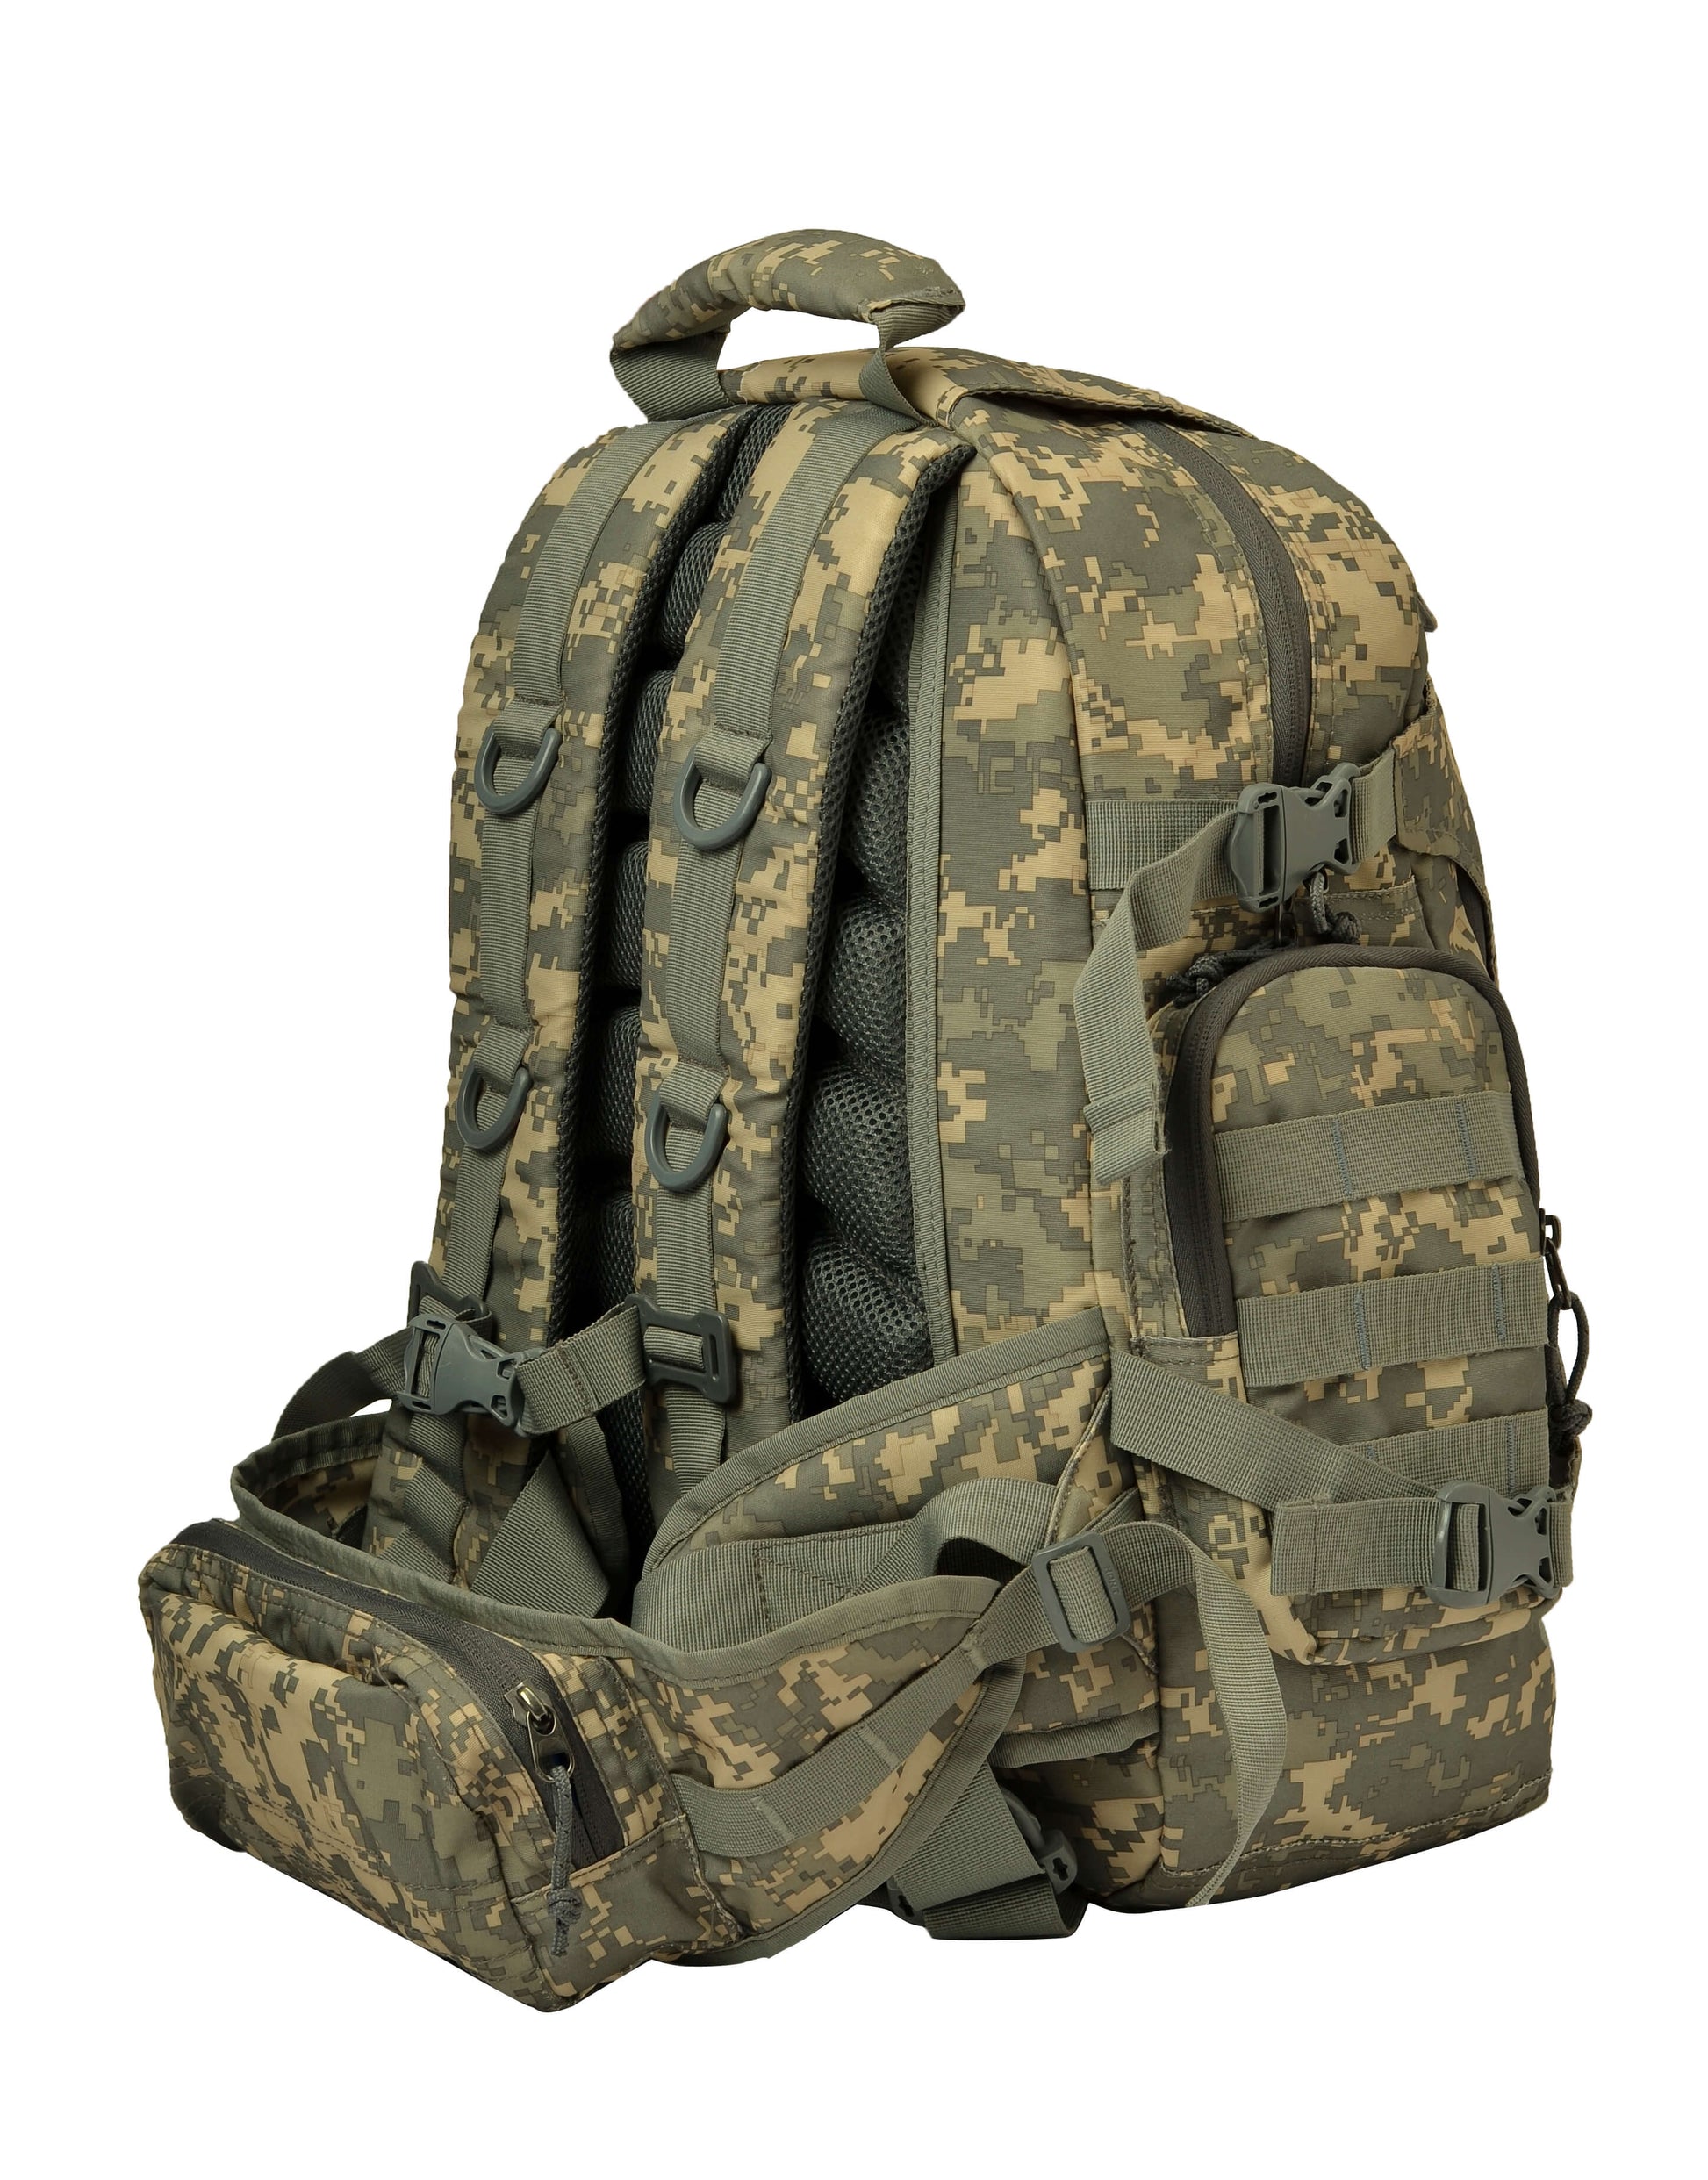 ACU DIGITAL CAMOUFLAGE TRANSPORT BUTT PACK - MOLLE Compatible, 10 x 8 x 6